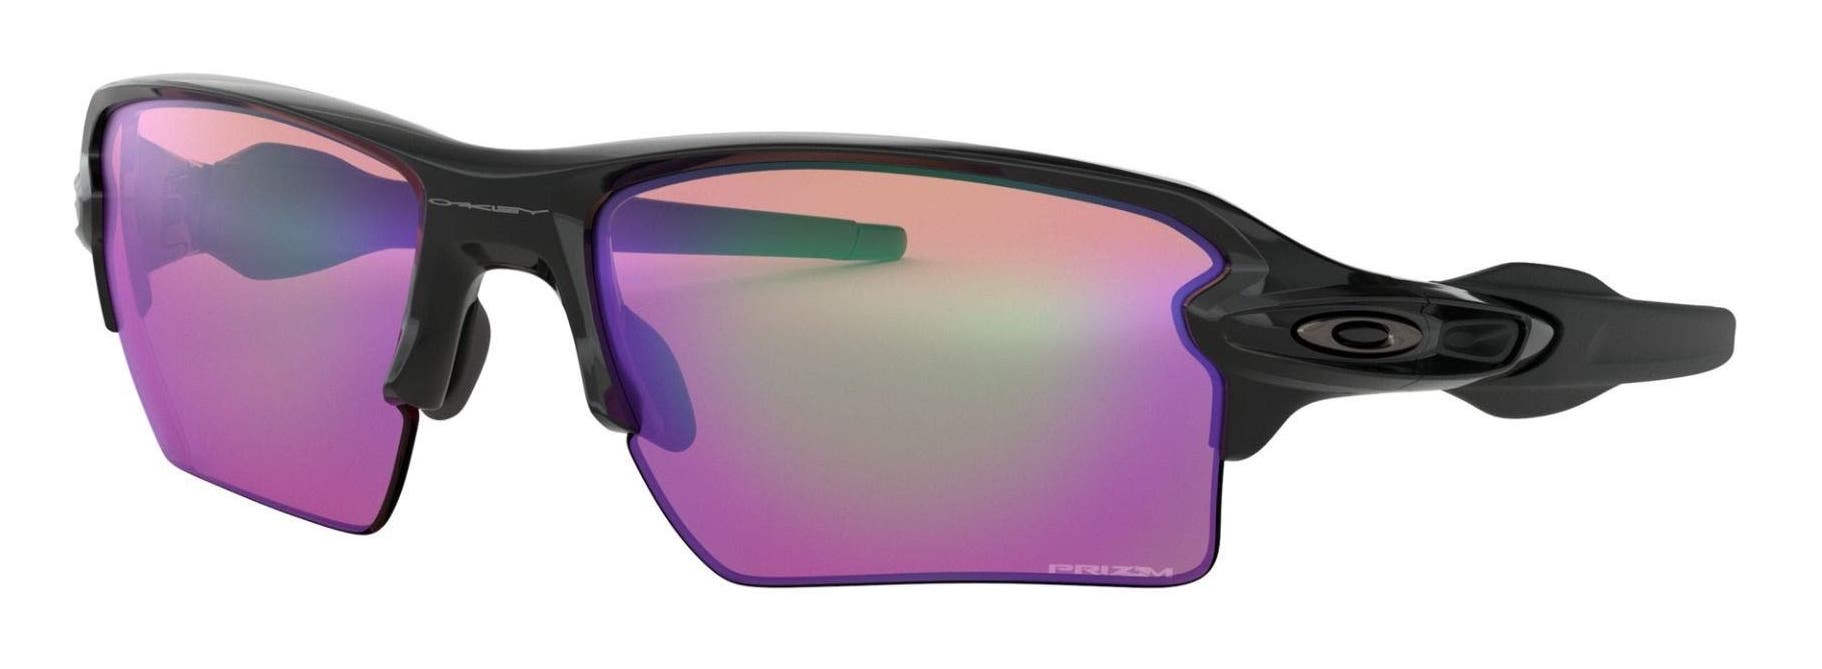 Oakley Flak 2.0 XL sunglasses recommended for pickleball eyewear. Polished black curved frame with PRIZM™ Golf lenses.